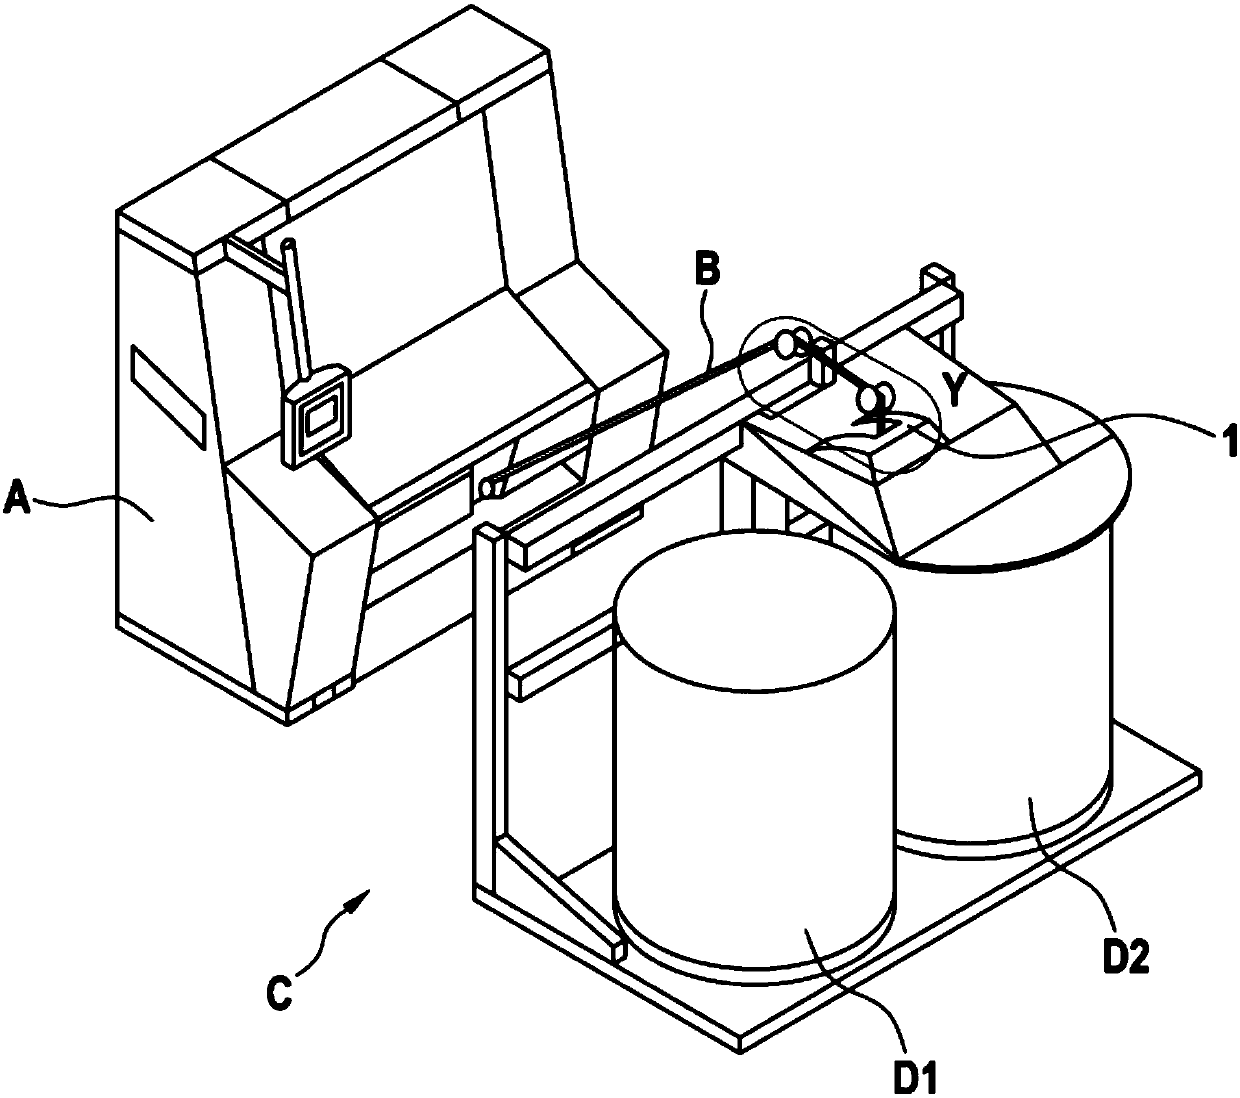 Device for depositing sliver in can